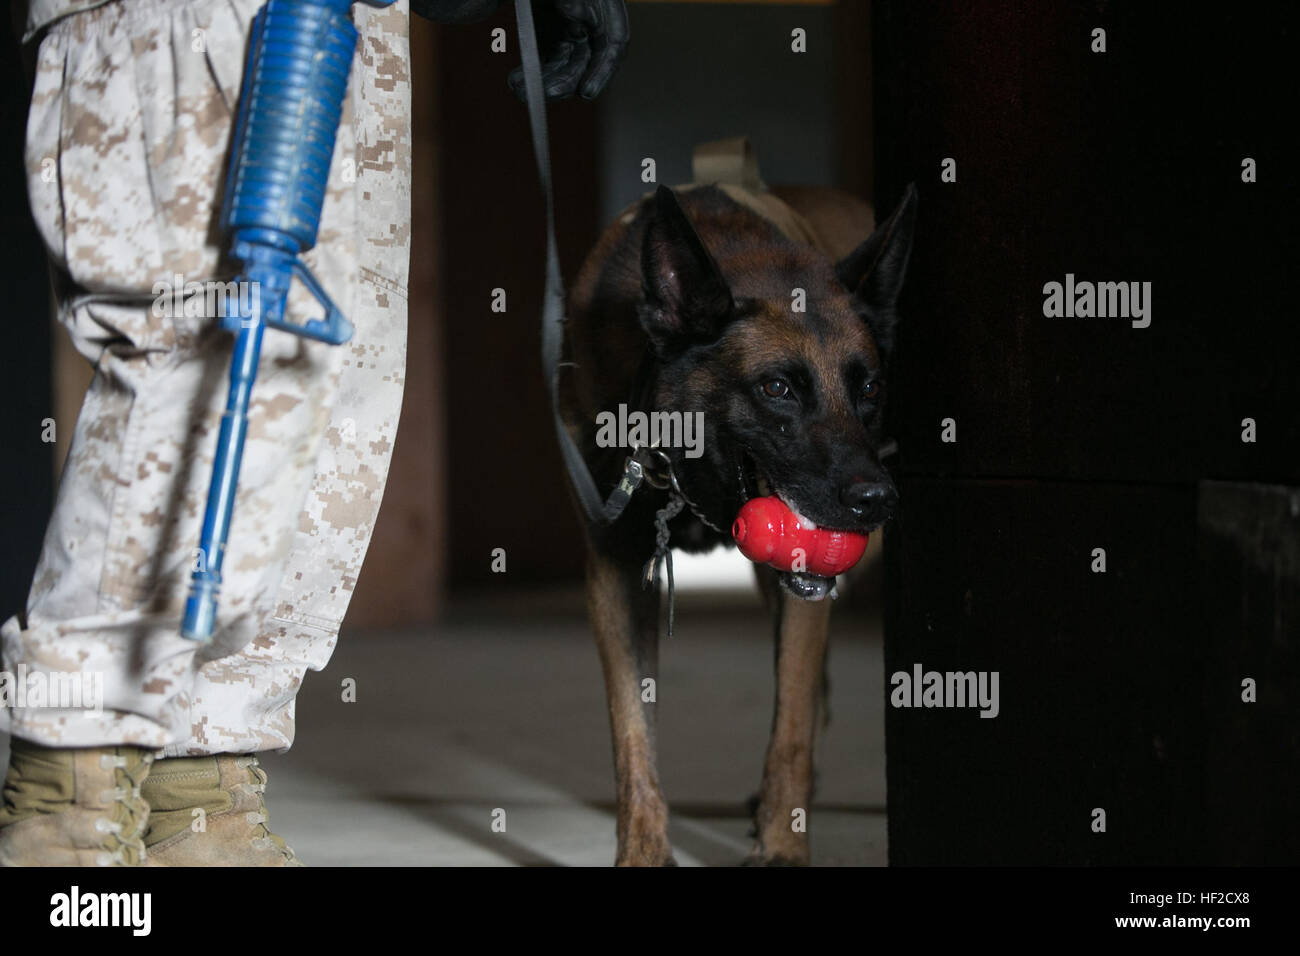 Semmy, a military working dog, receives a toy from his dog handler, Lance Cpl. Ryan Smith, a Kansas City, Kansas, native, after properly clearing a building while searching for hidden narcotics and explosives Aug. 7 during a training event at the Central Training Area, Okinawa, Japan. Handlers use toys as incentive for the dog to complete their task correctly. Military working dog handlers executed explosives and narcotics detection, patrolling and bite work training throughout the day. Smith is a military working dog handler with 3rd Law Enforcement Battalion, III Marine Expeditionary Force H Stock Photo